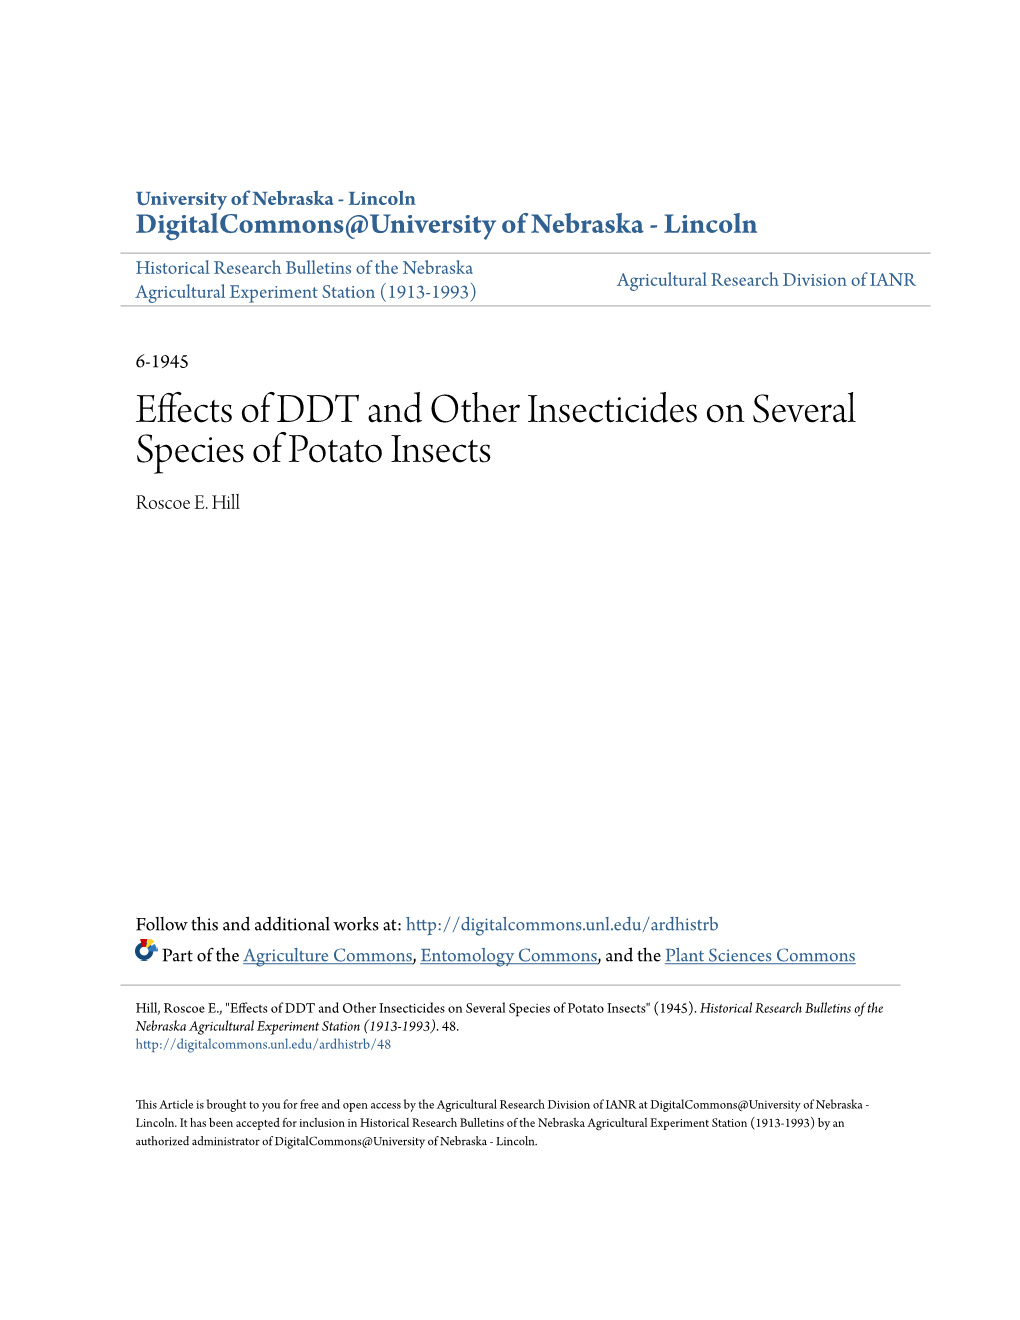 Effects of DDT and Other Insecticides on Several Species of Potato Insects Roscoe E